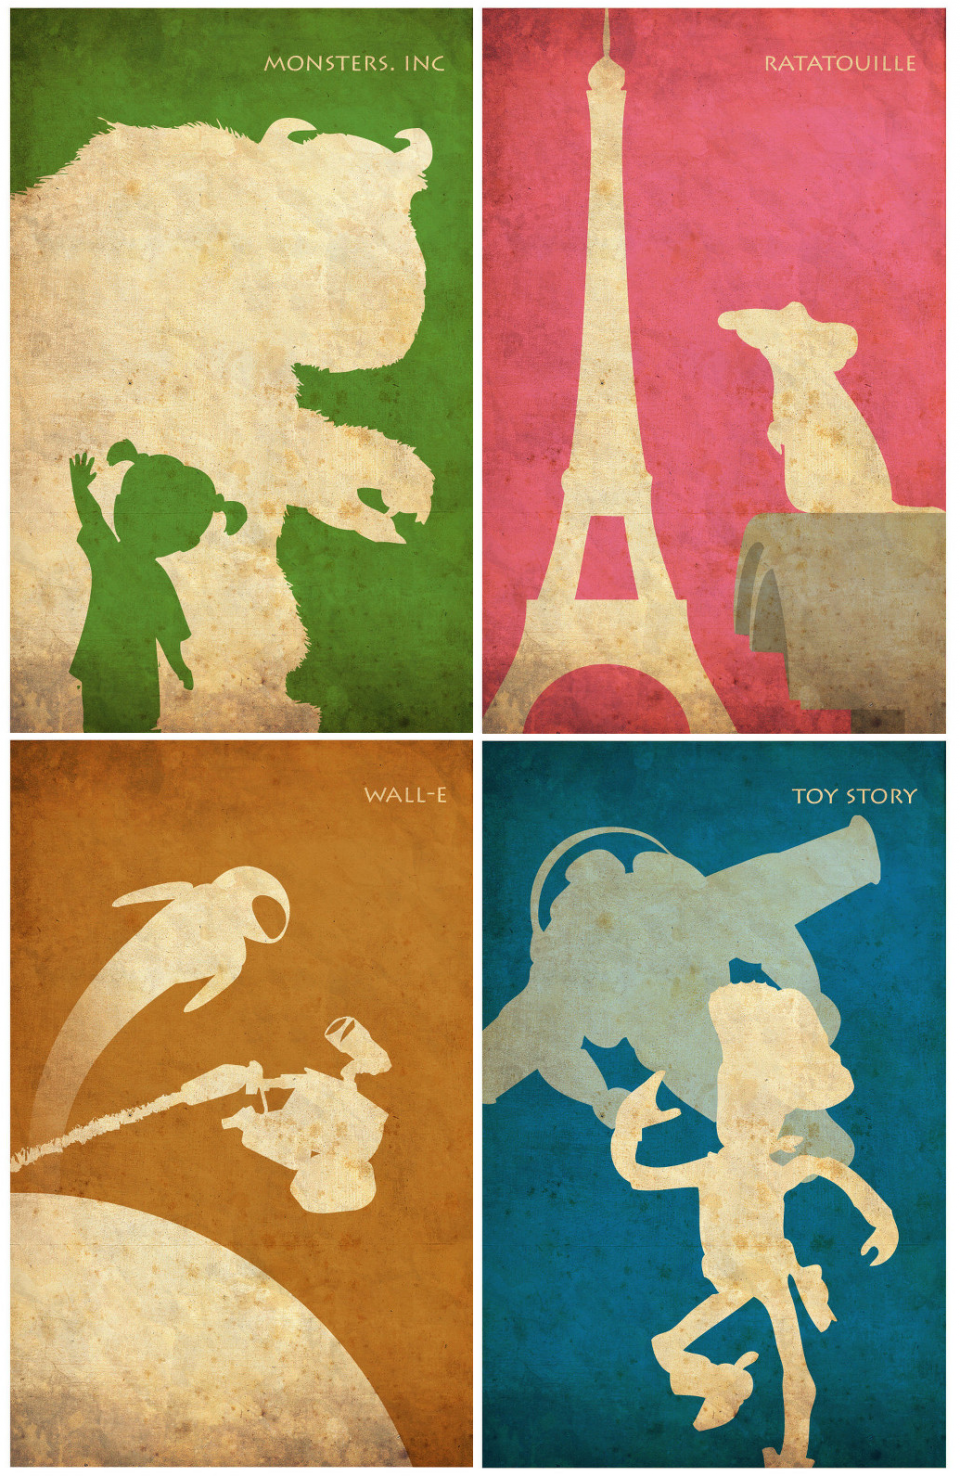 Posterinspired-Pixar-Monstres et compagnie-Ratatouille-Toy Story-Wall-E